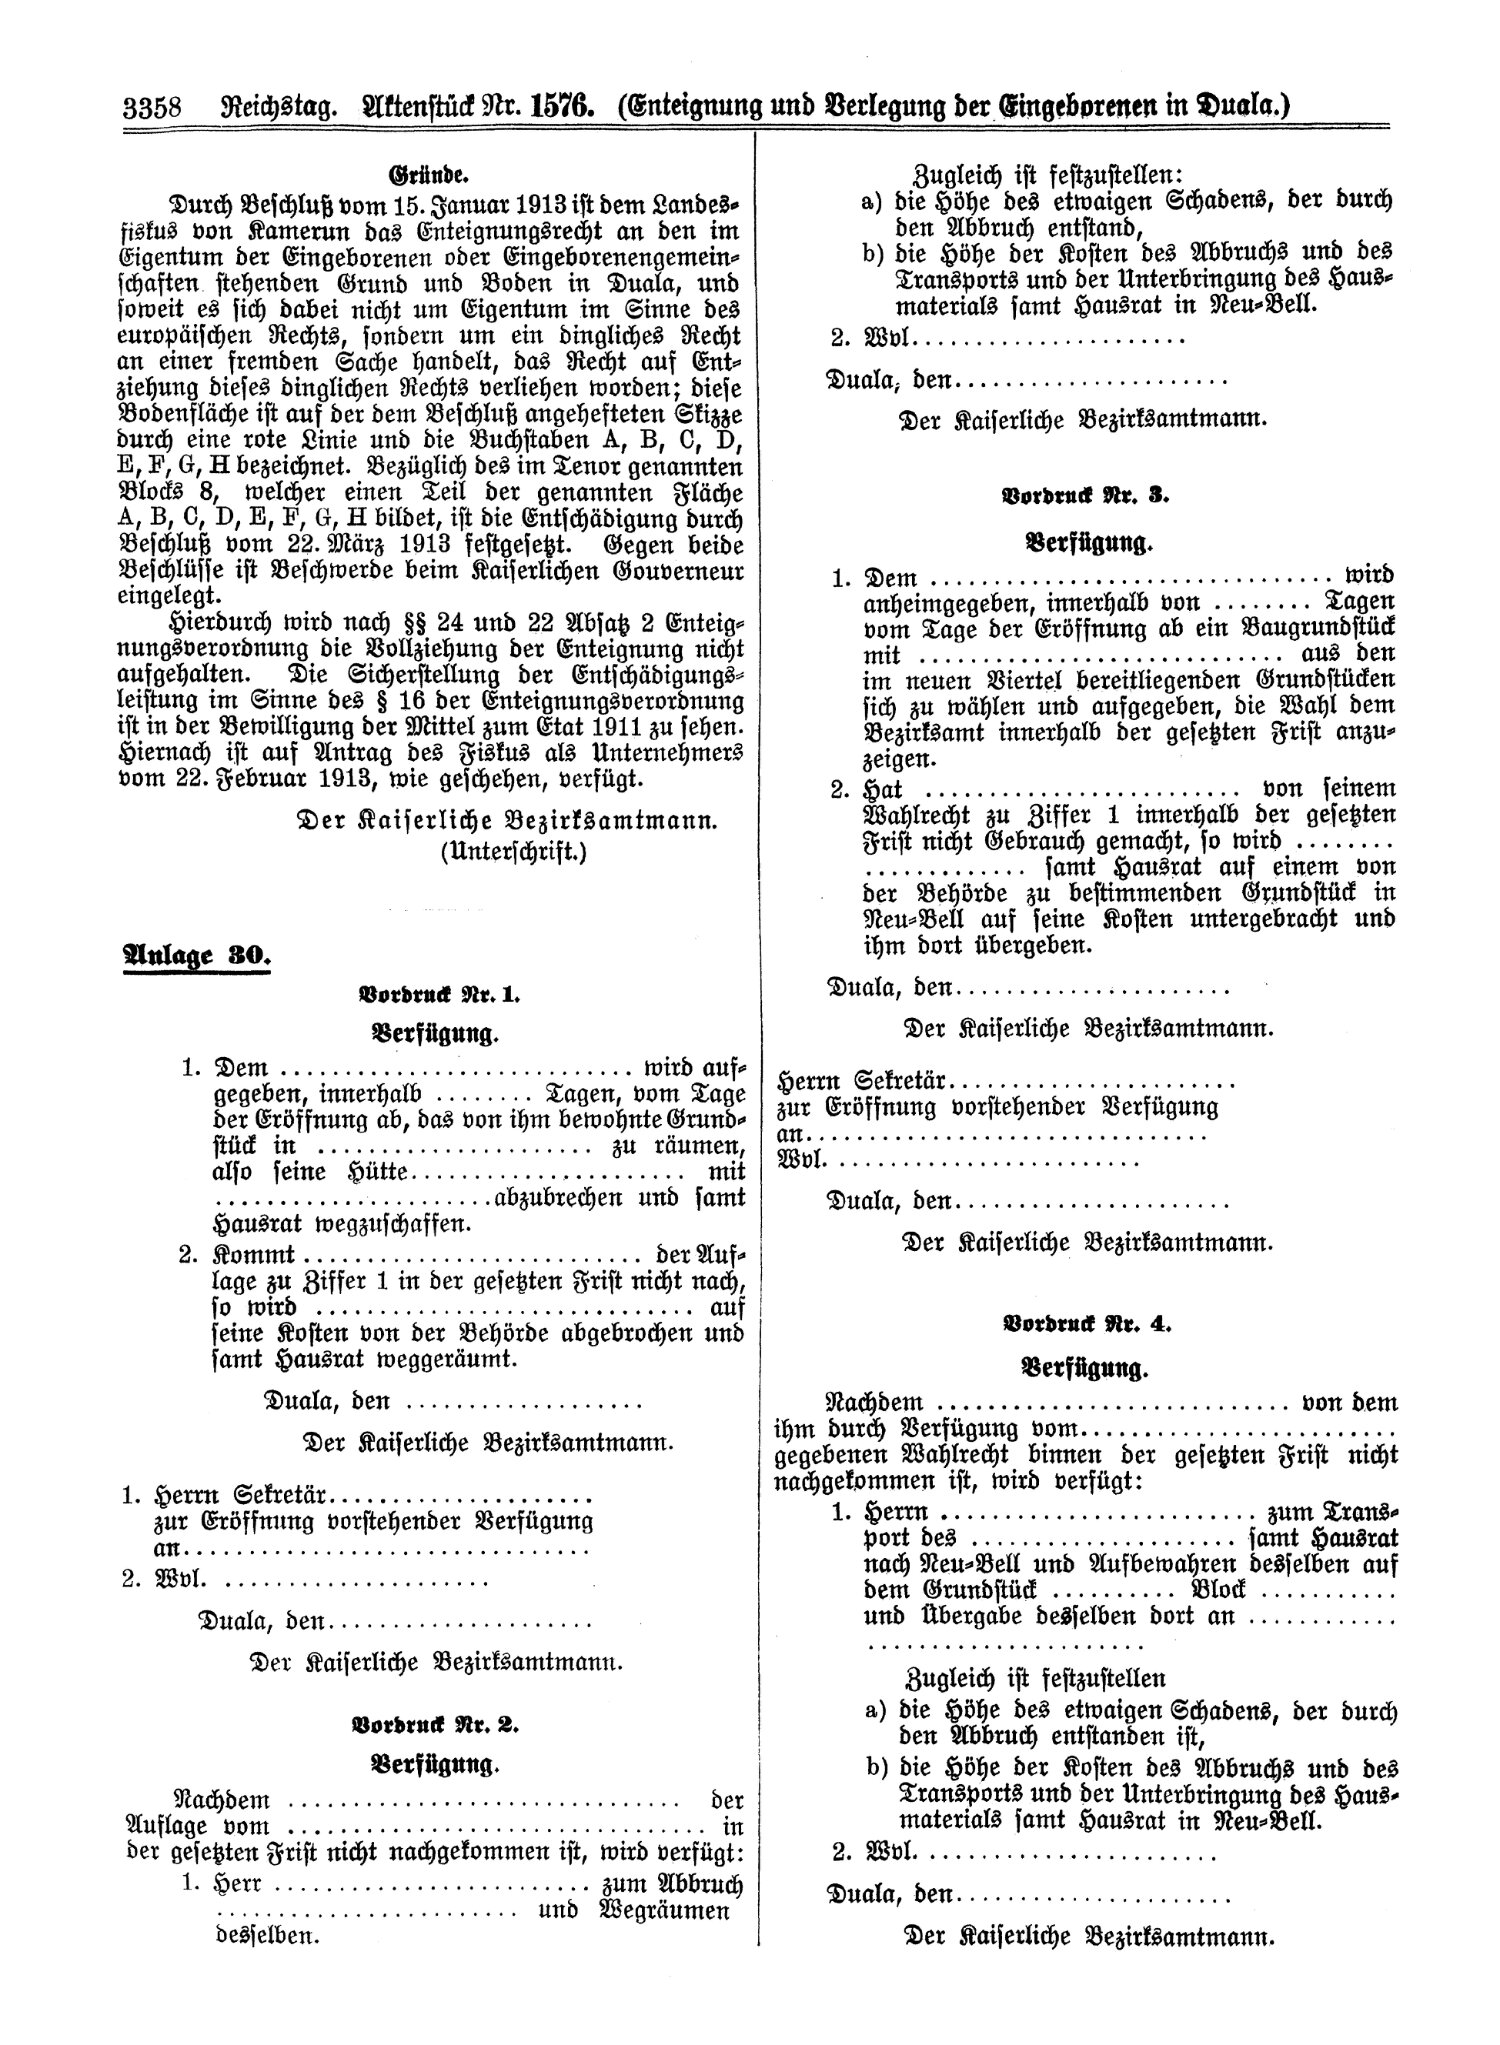 Scan of page 3358